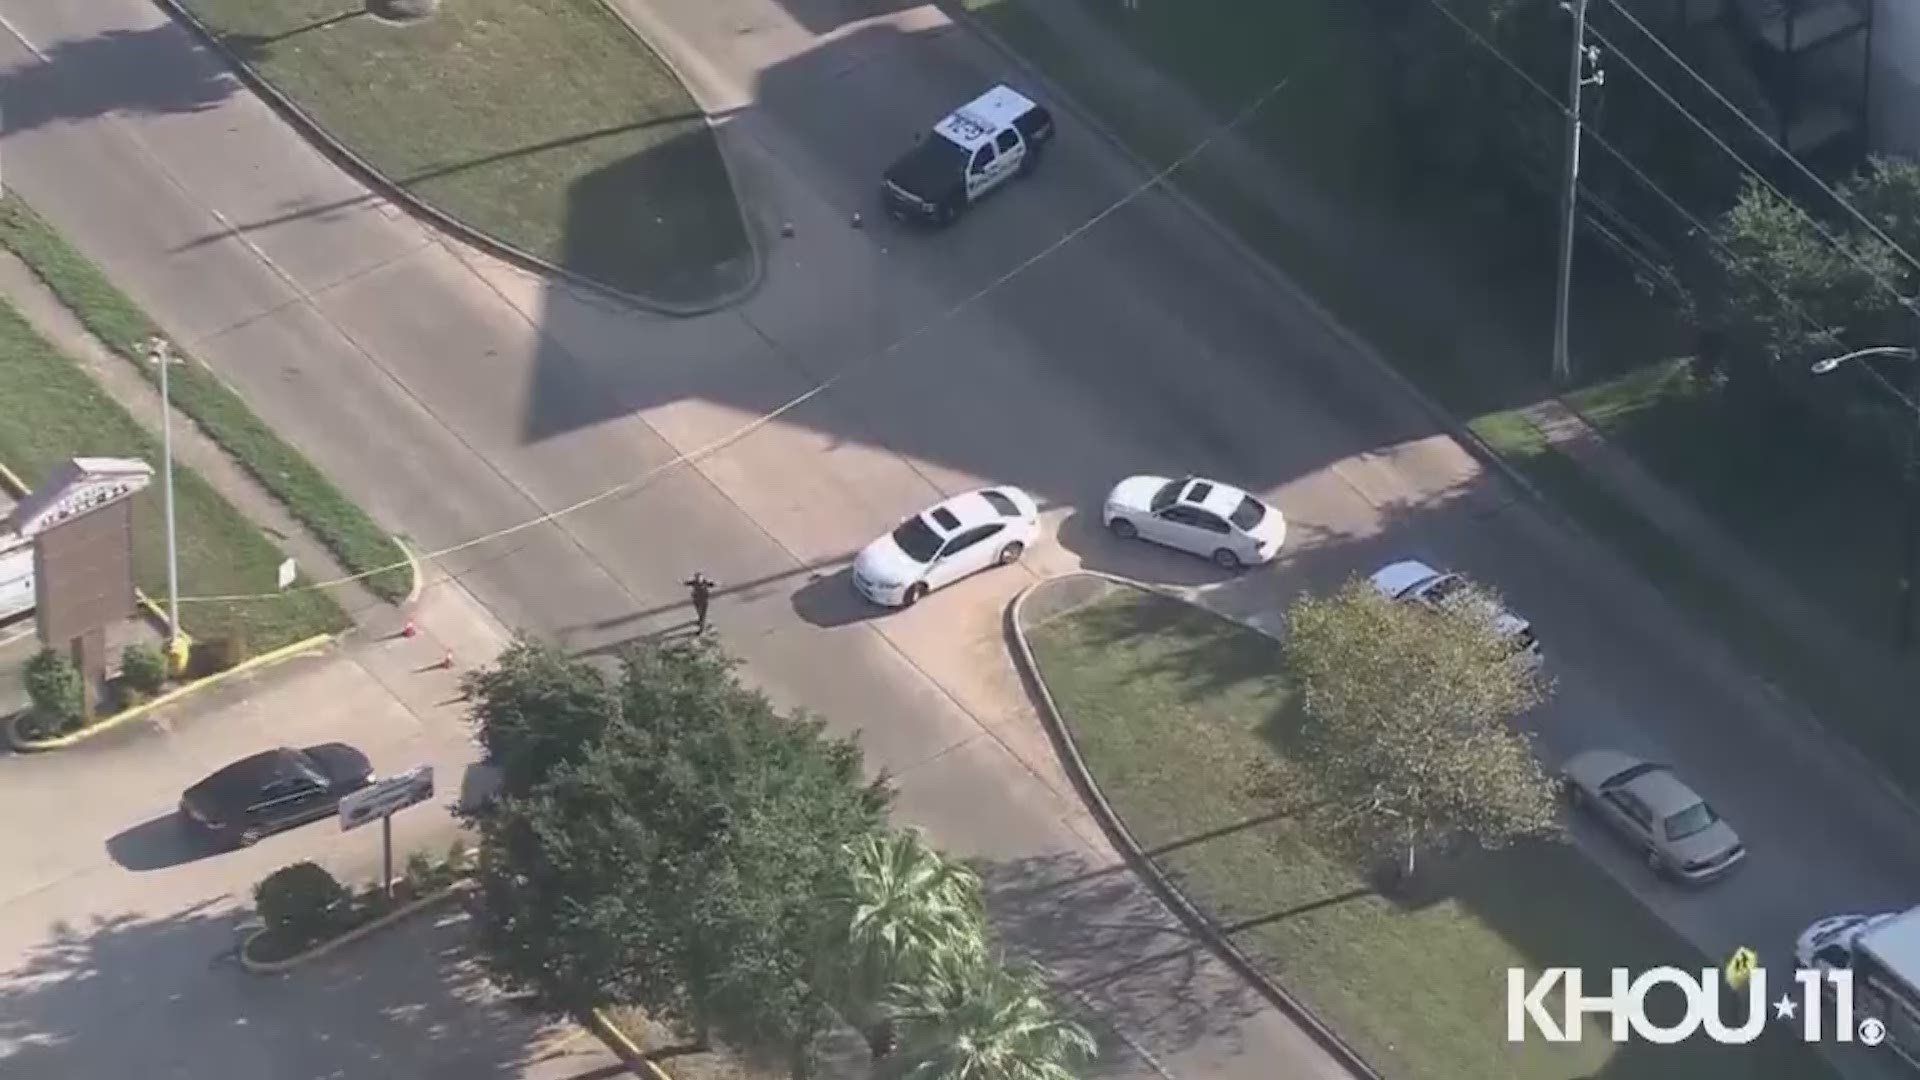 Houston Police Department Chief Art Acevedo said two officers responded to reports of a man brandishing a weapon at a car wash near the 10700 block of South Gessner in Valley West Elementary School.